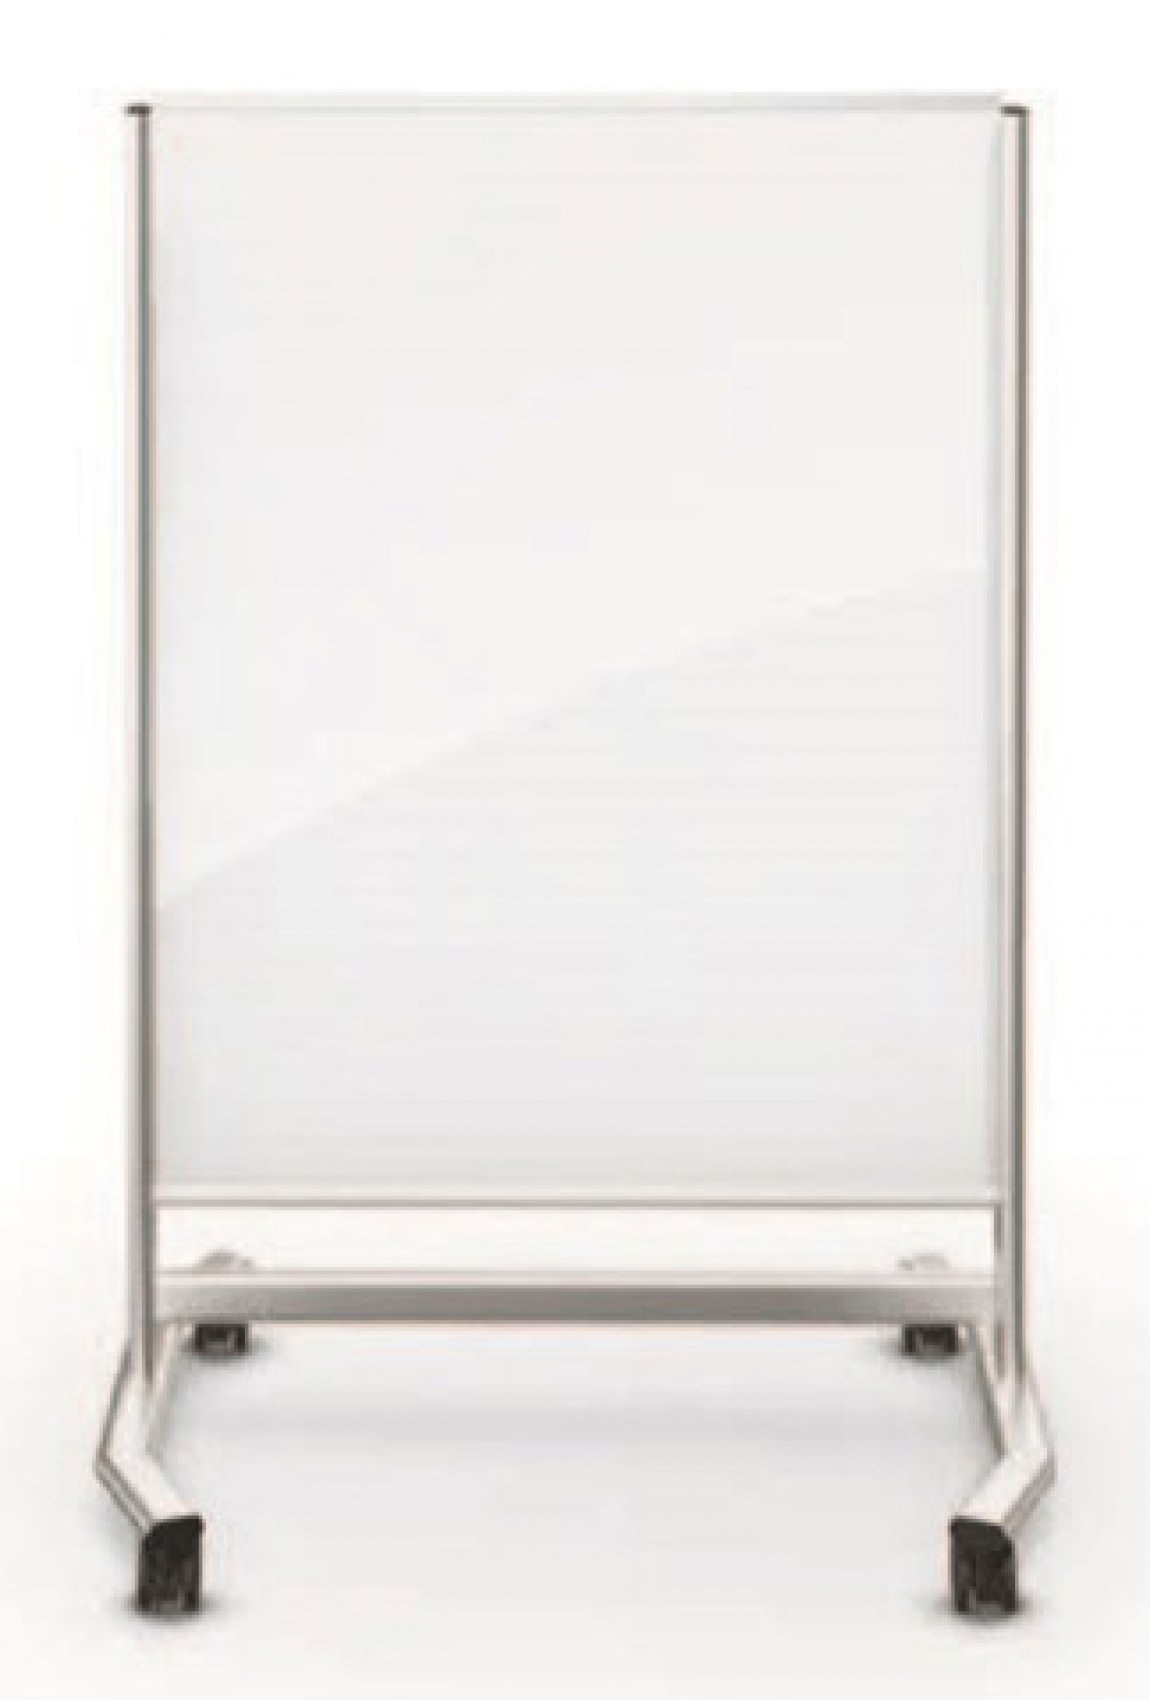 Mobile Magnetic Glass Dry Erase Whiteboard